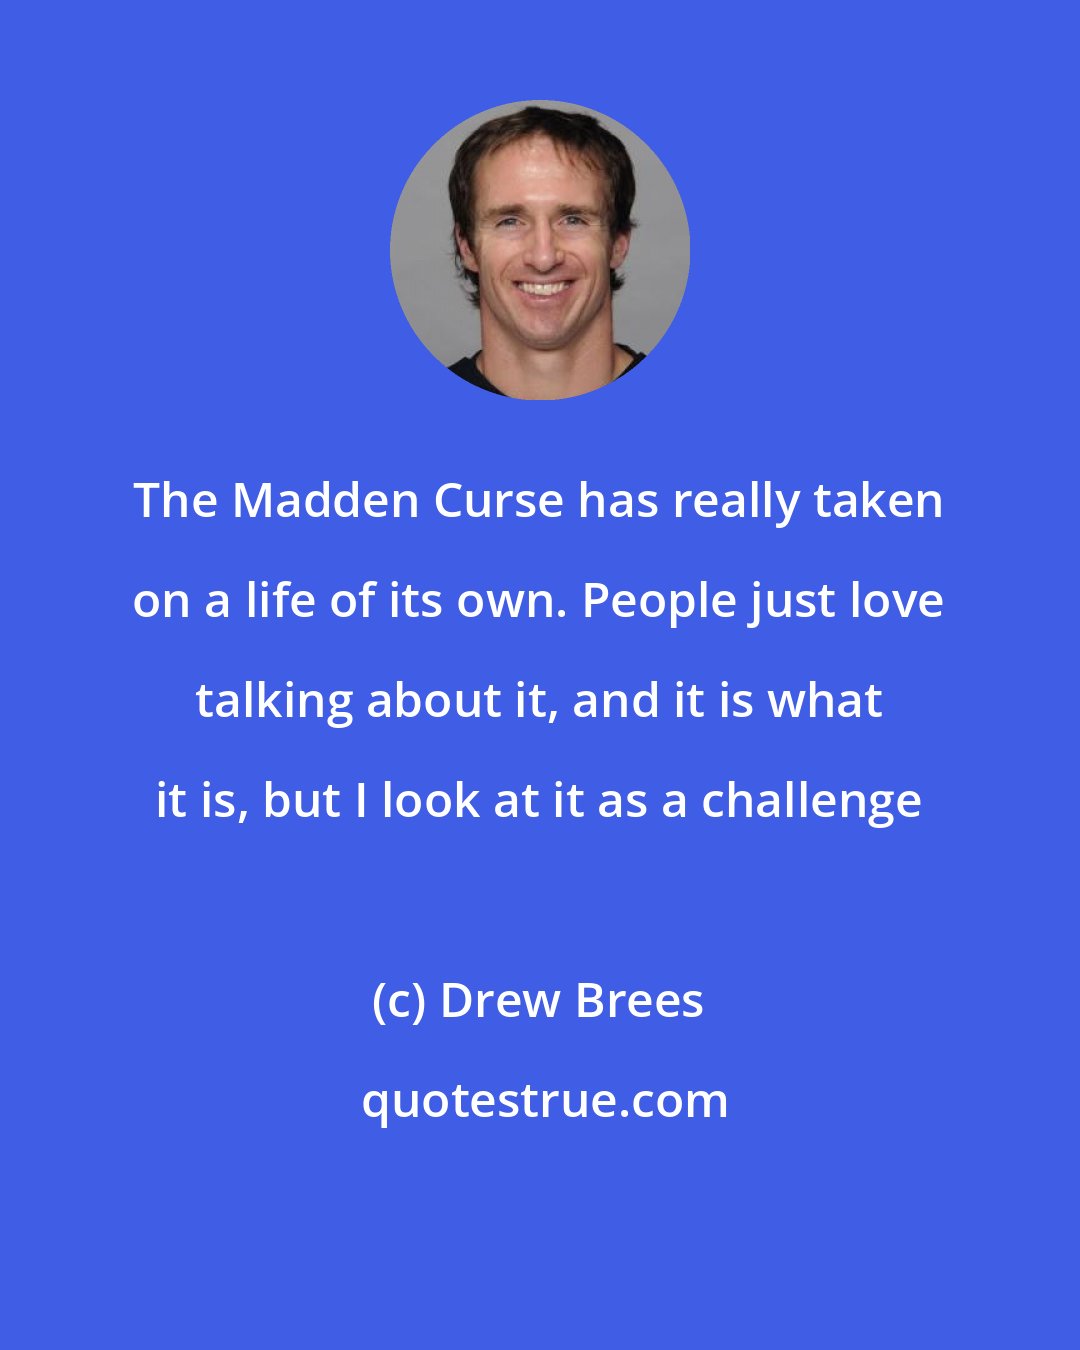 Drew Brees: The Madden Curse has really taken on a life of its own. People just love talking about it, and it is what it is, but I look at it as a challenge